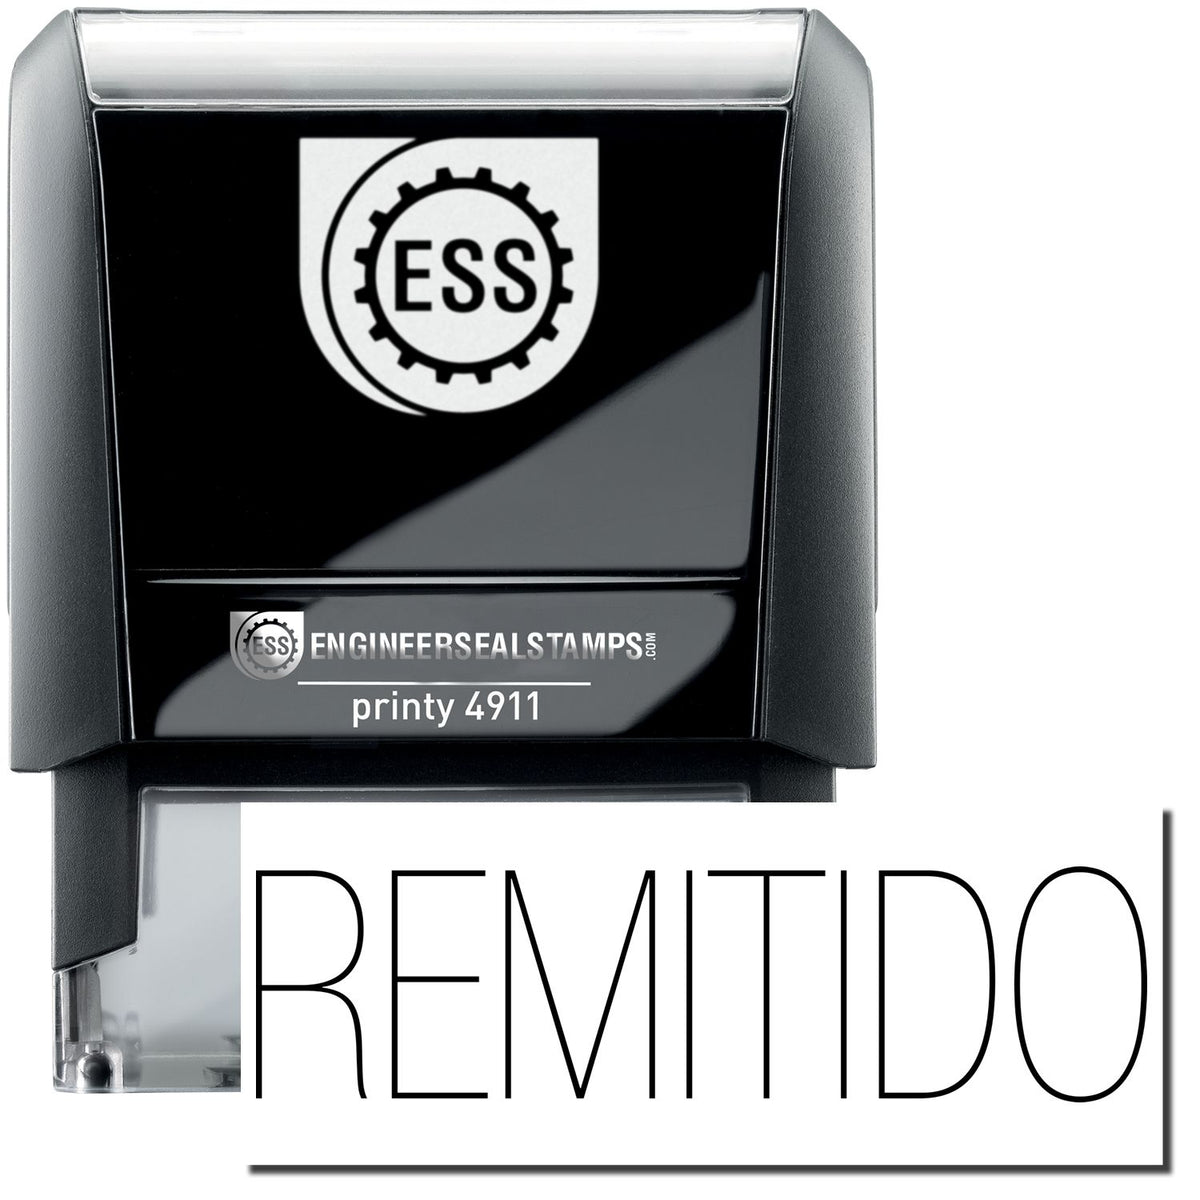 A self-inking stamp with a stamped image showing how the text &quot;REMITIDO&quot; is displayed after stamping.